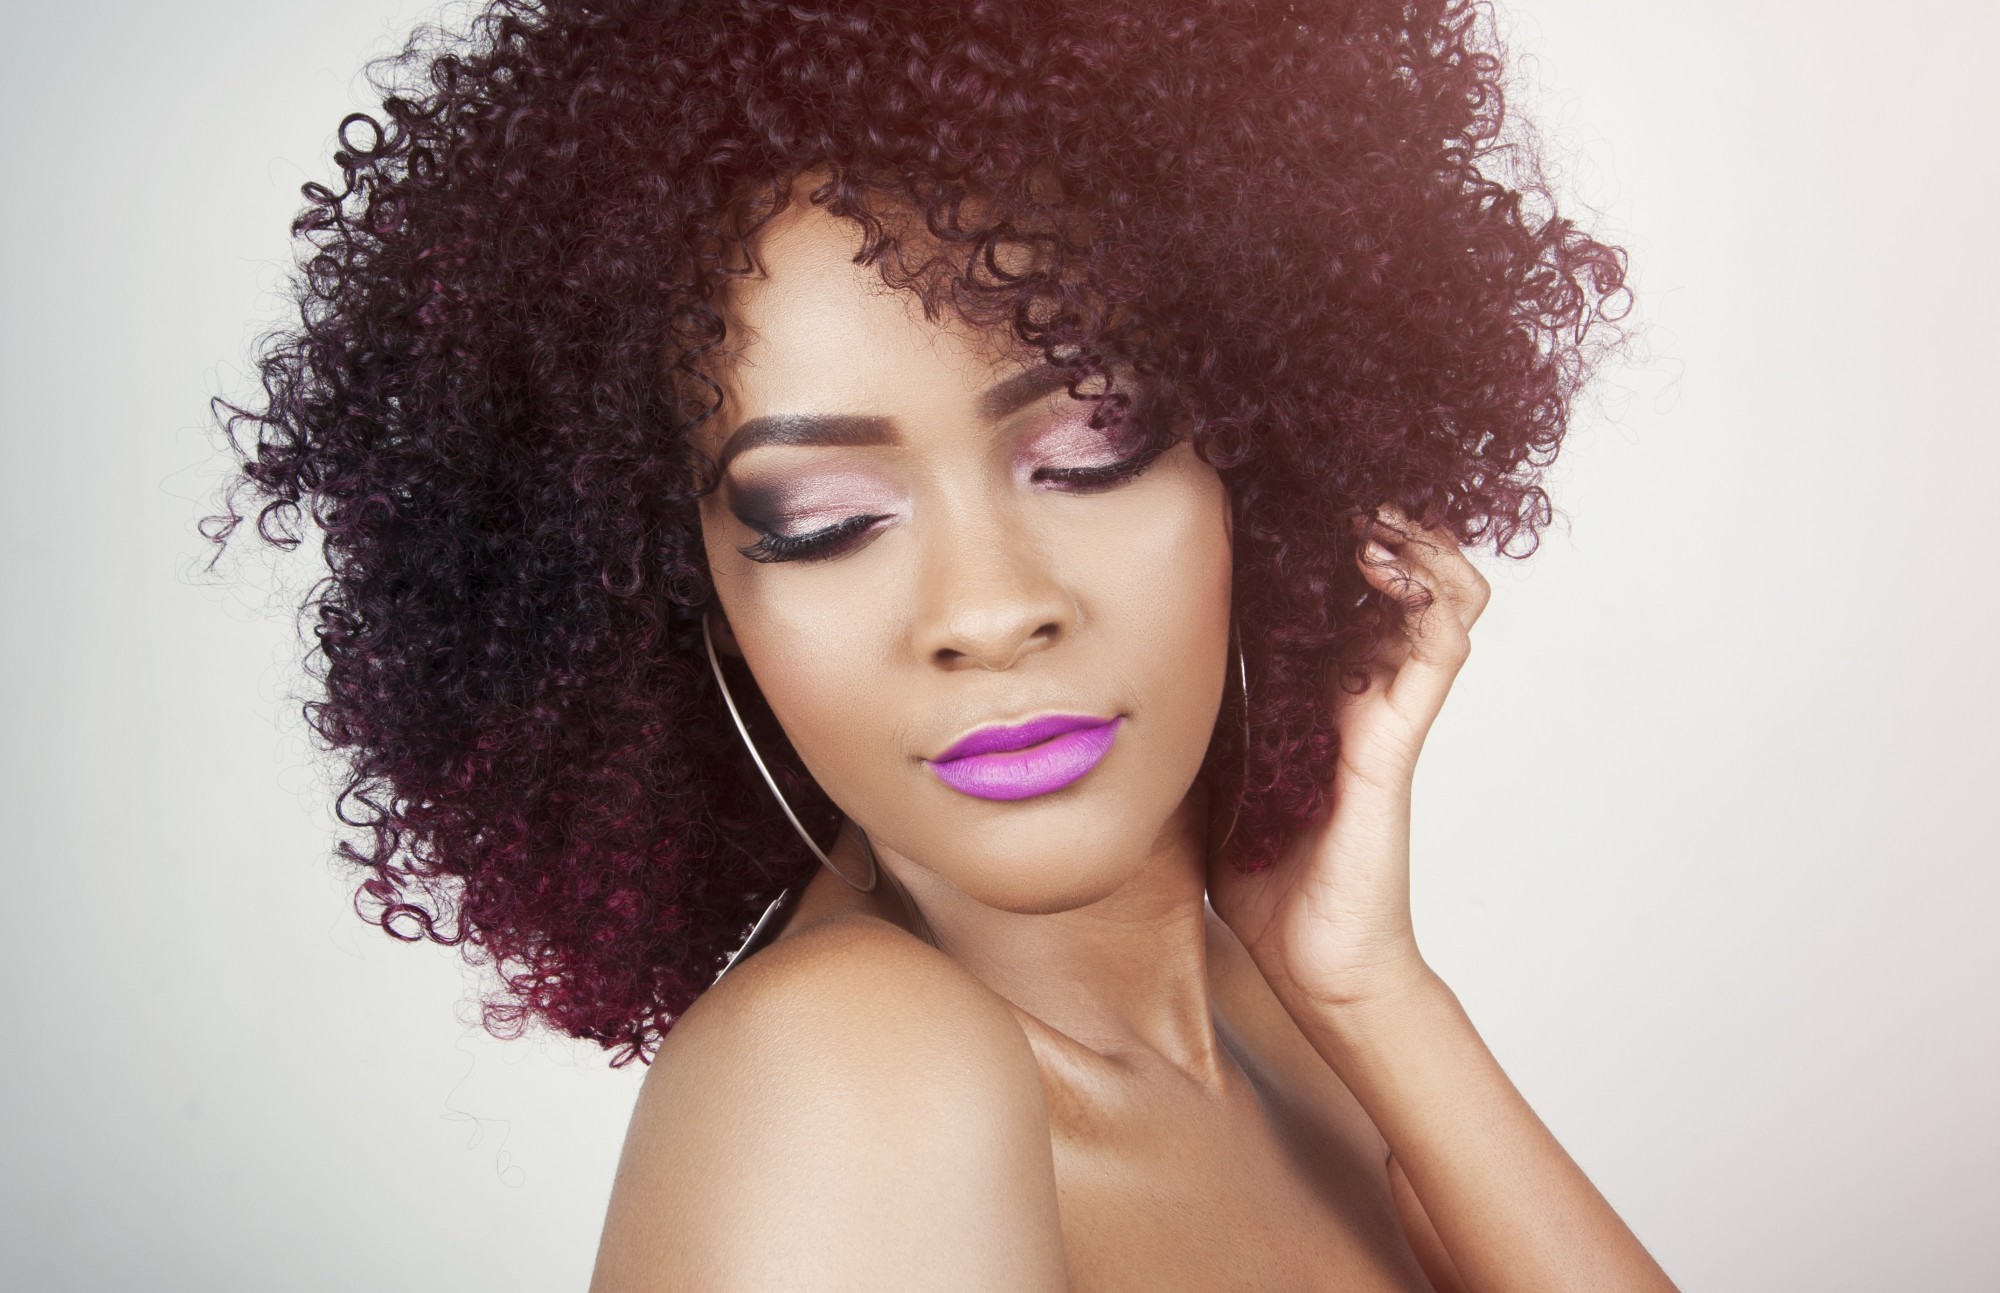 4 Natural Hair Styles You Should Consider at Your Salon